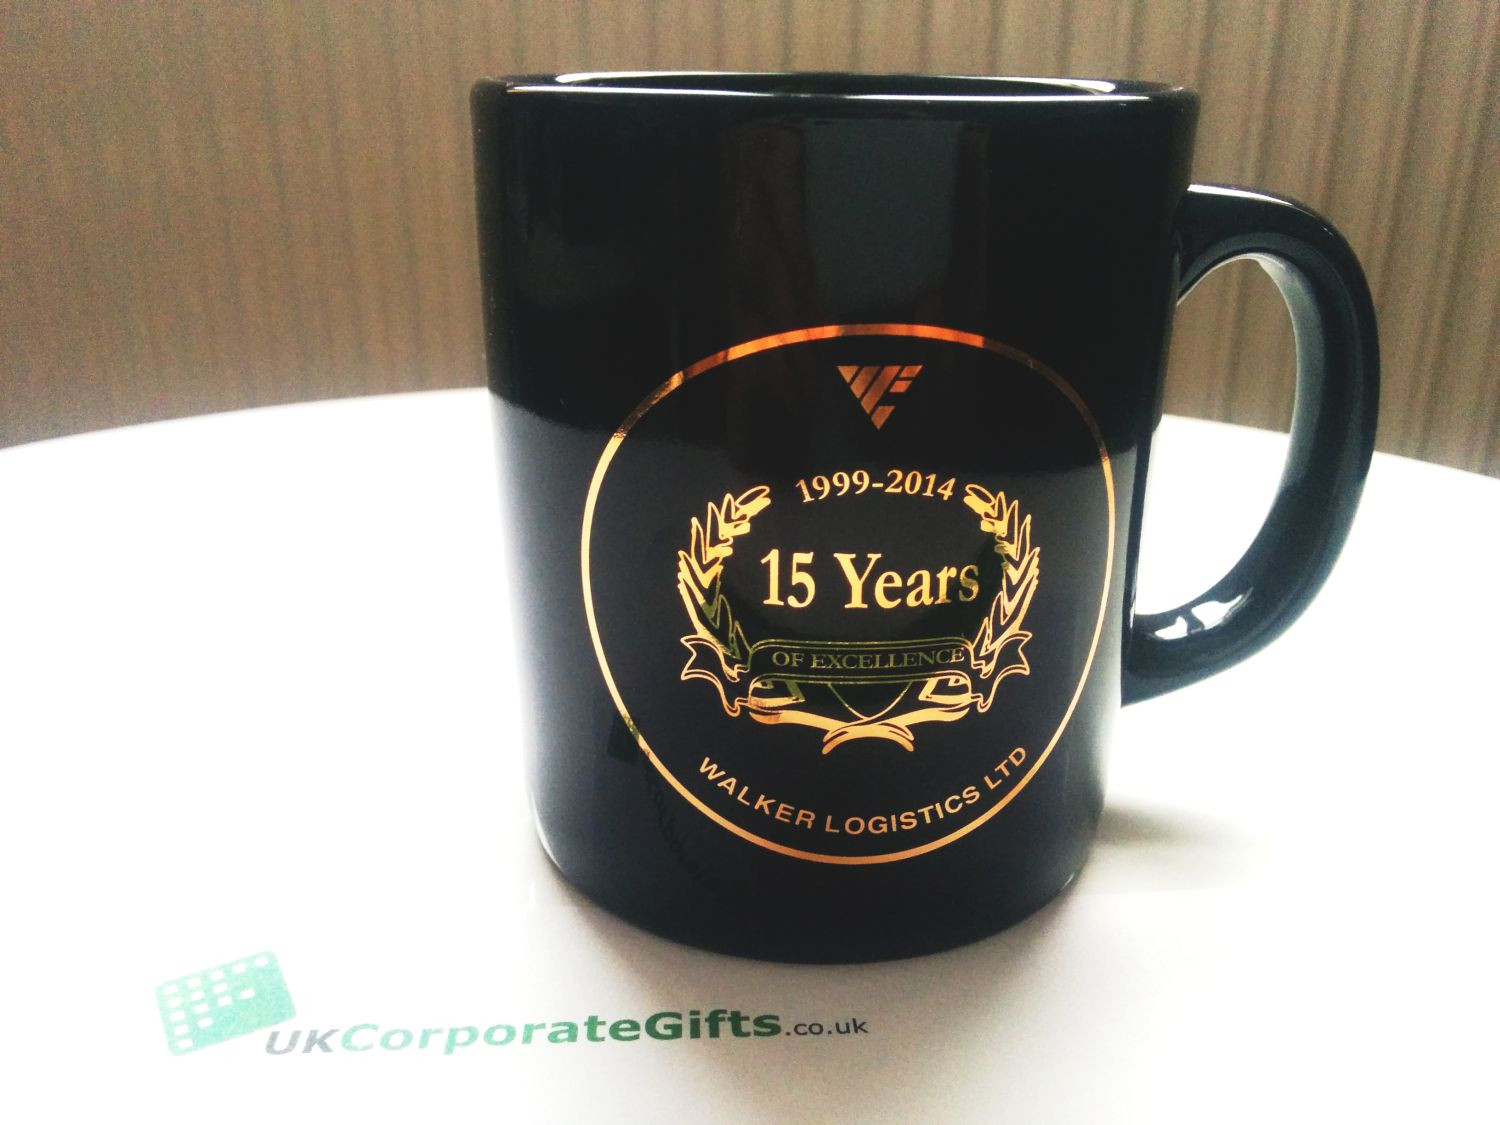 Business Anniversary Gift Ideas
 Promotional Cambridge Mugs for Anniversary Celebration